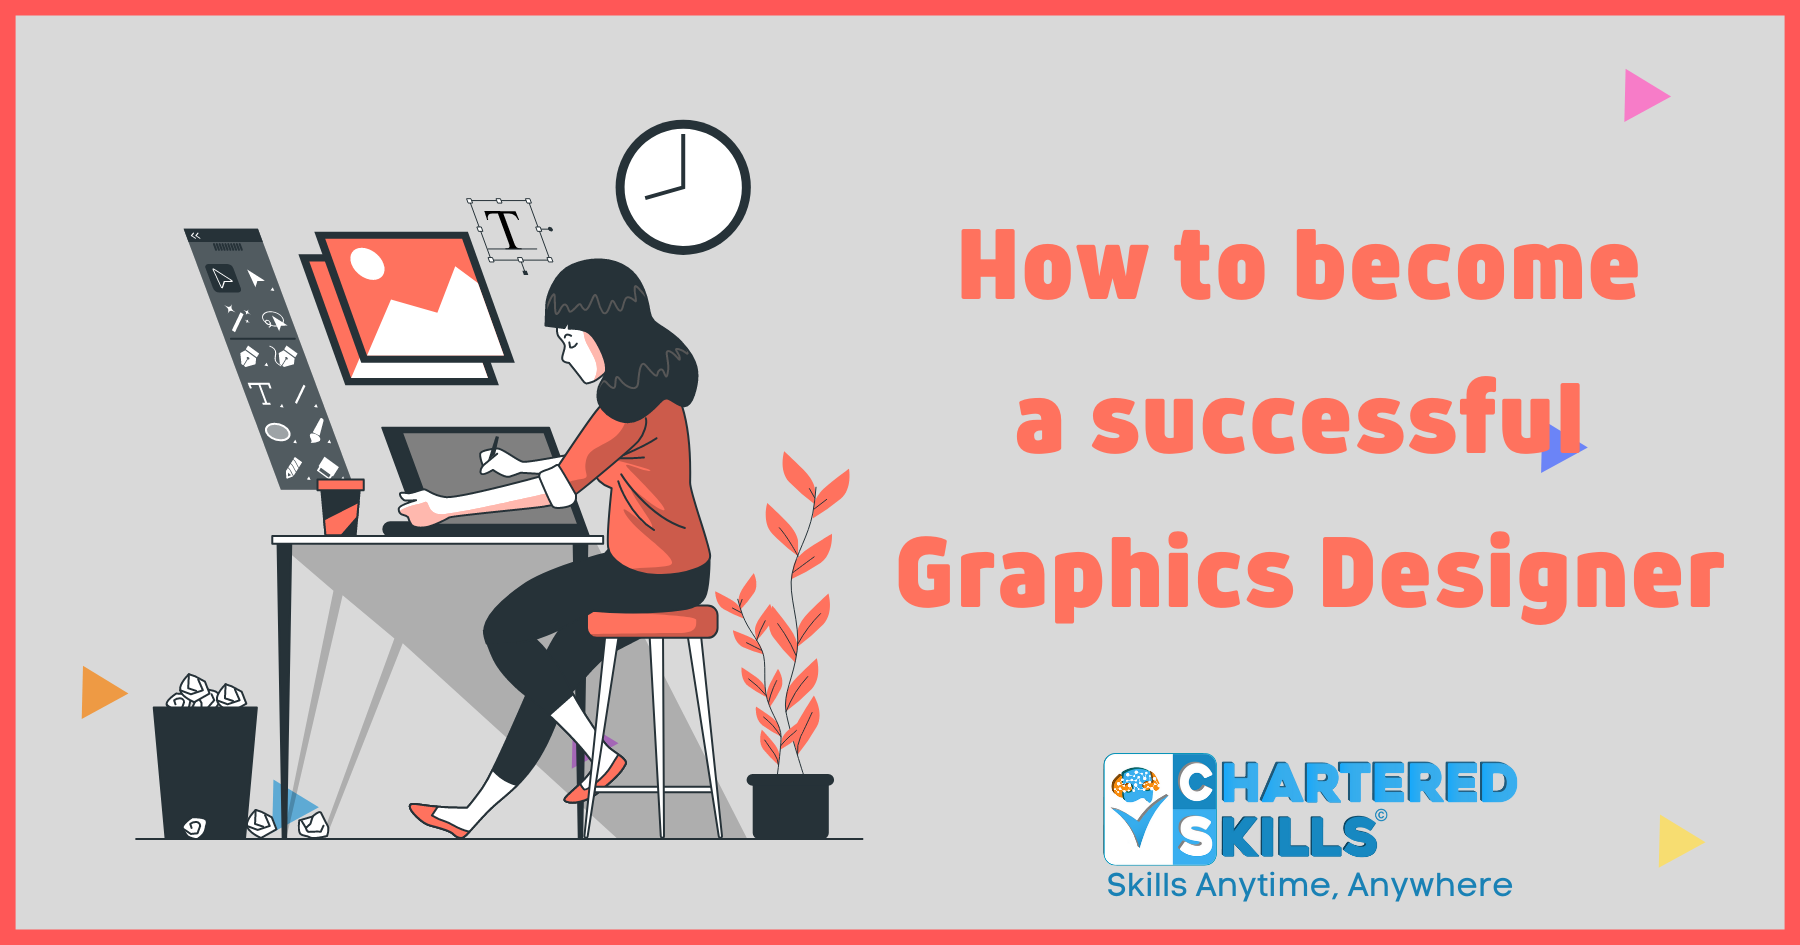 How to become a successful Graphics Designer